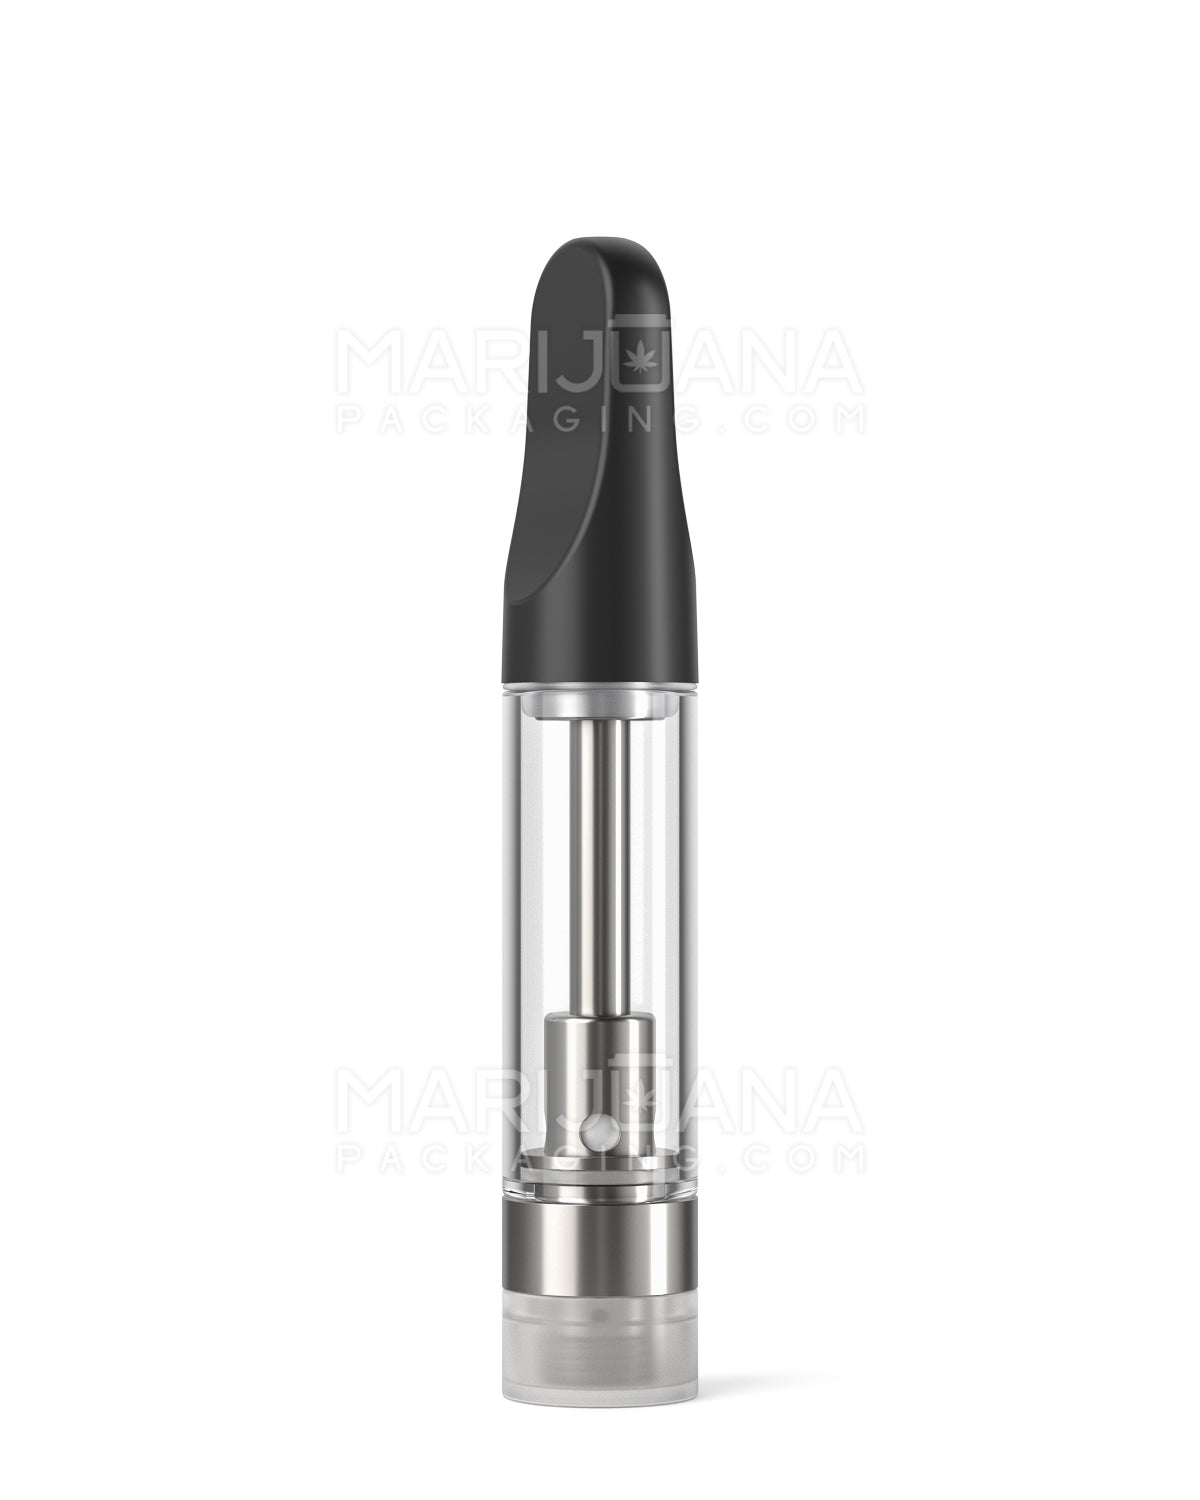 CCELL | Liquid6 Reactor Glass Vape Cartridge with Black Plastic Mouthpiece | 1mL - Screw On - 100 Count - 3